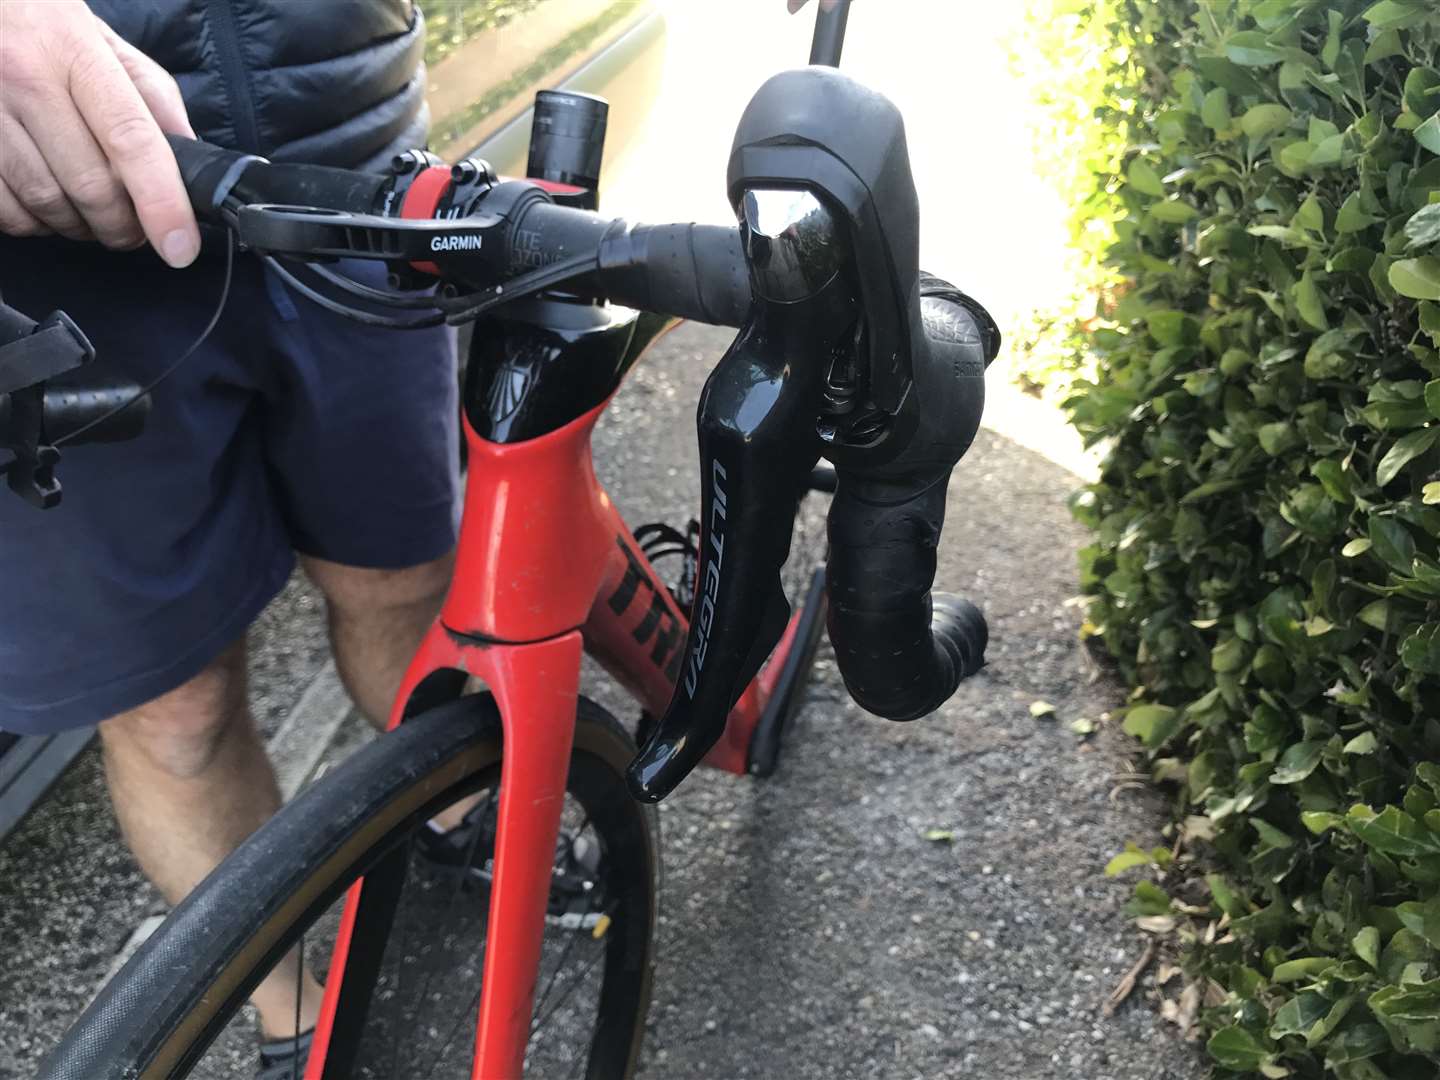 Damage was caused to Keith Patrick's bike during the incident in Birchington. Picture: Keith Patrick